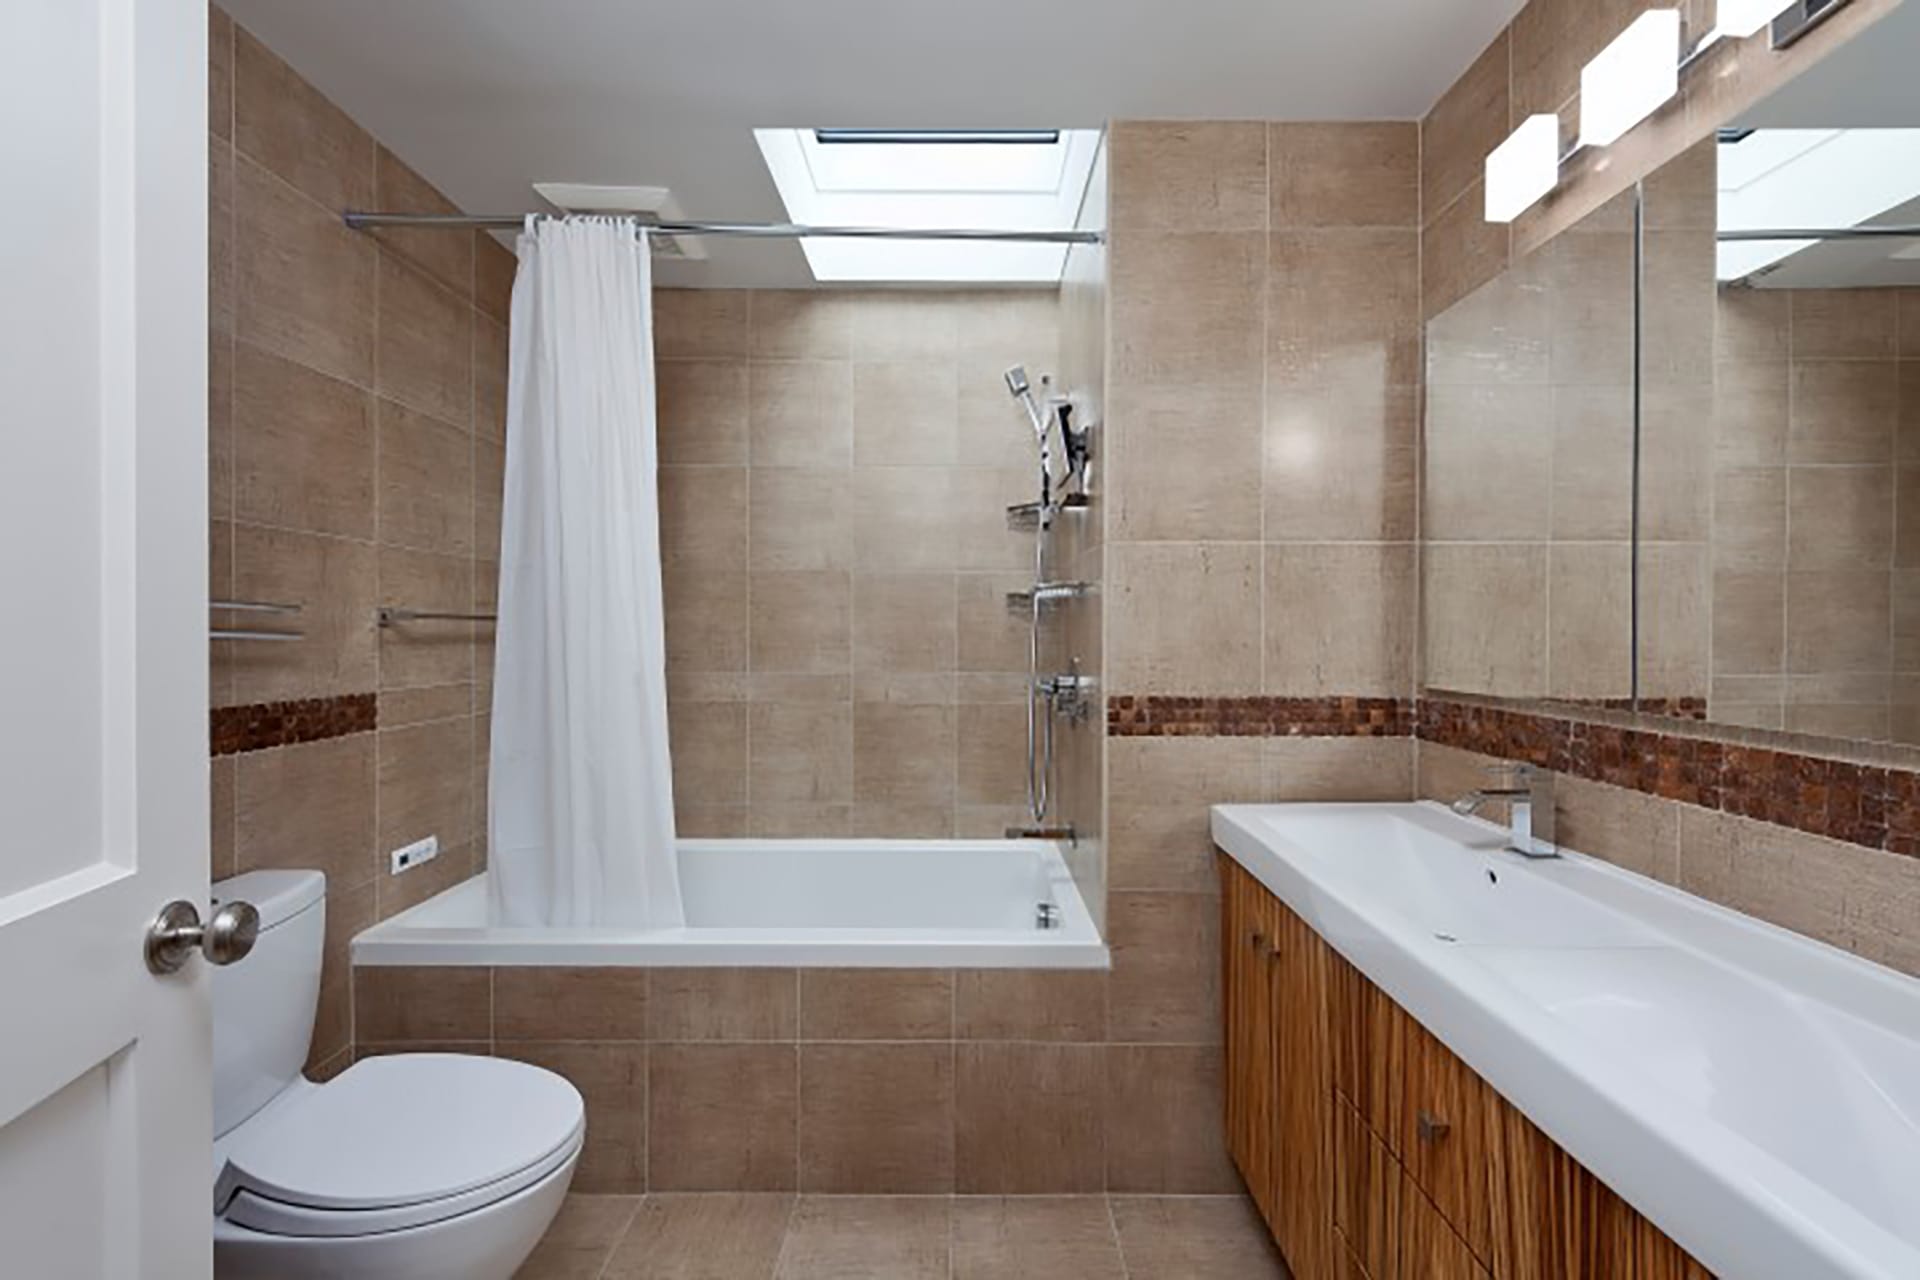 Primary bathroom with a skylight above the built-in tub, stone tiled walls and floors, and wood vanity